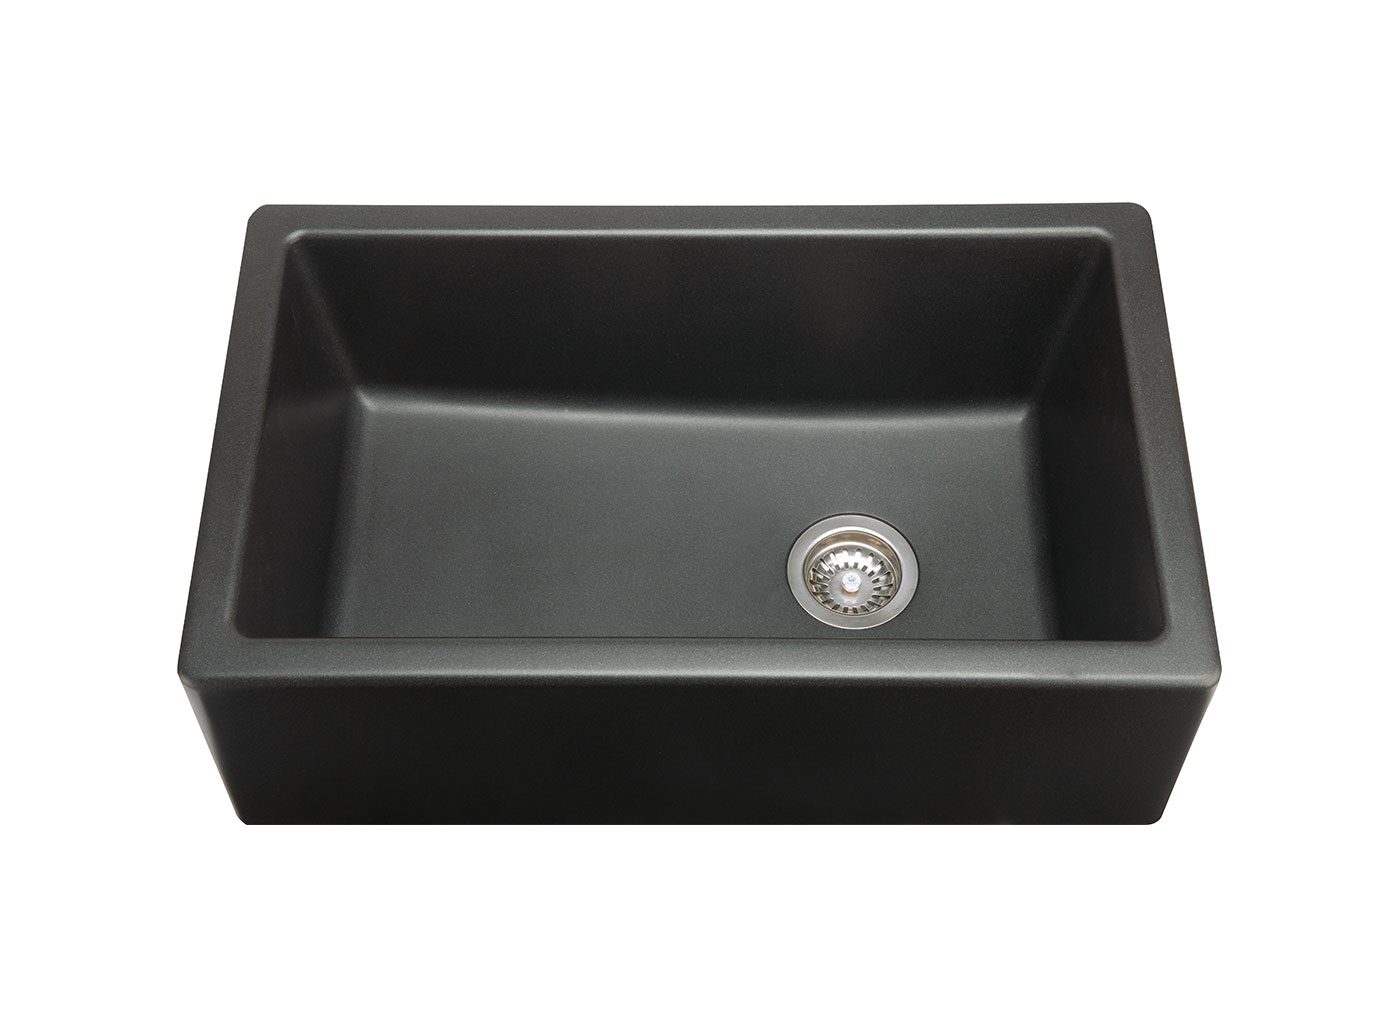 Chambord sinks are a statement as well as an object of utility at home in the grandest of kitchens. These kitchen sinks are made with ceramic